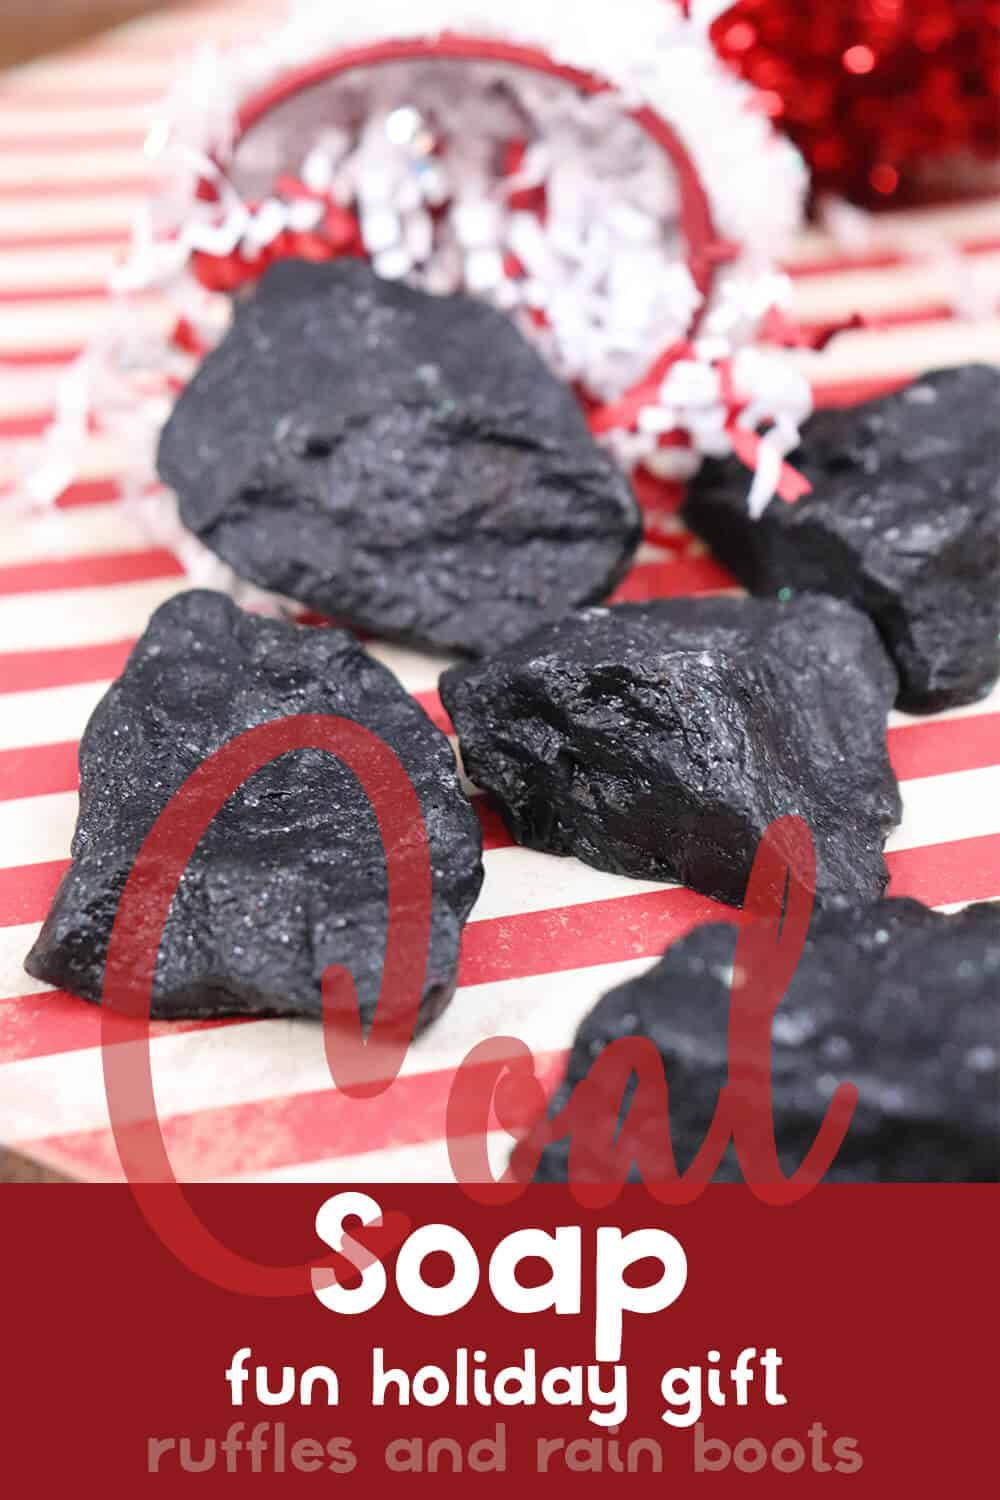 several piece of coal soaps on a red and white background with text which reads coal soap fun holiday gift